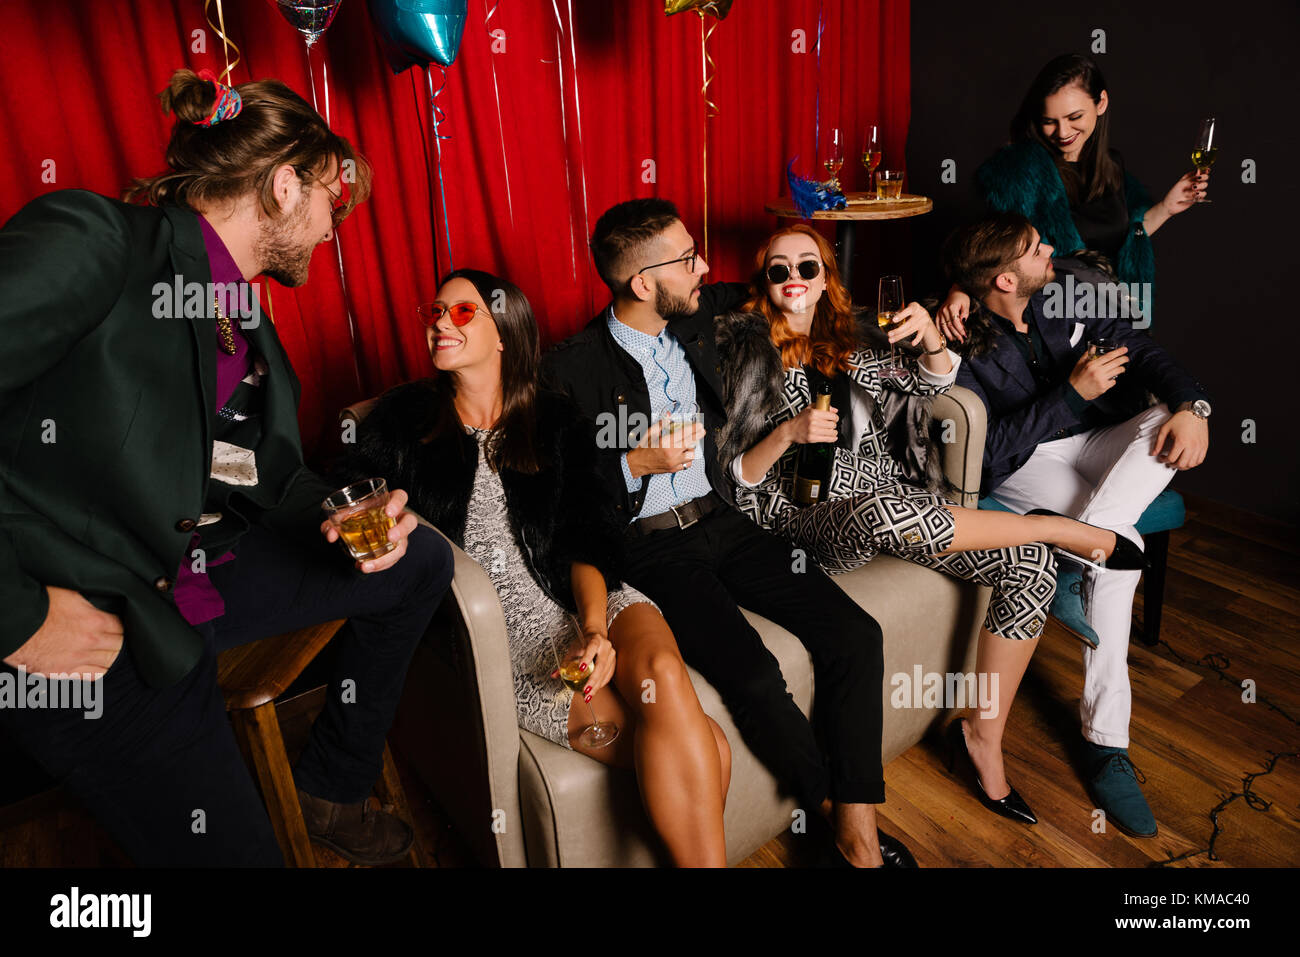 Group of people having a small talk at a party Stock Photo